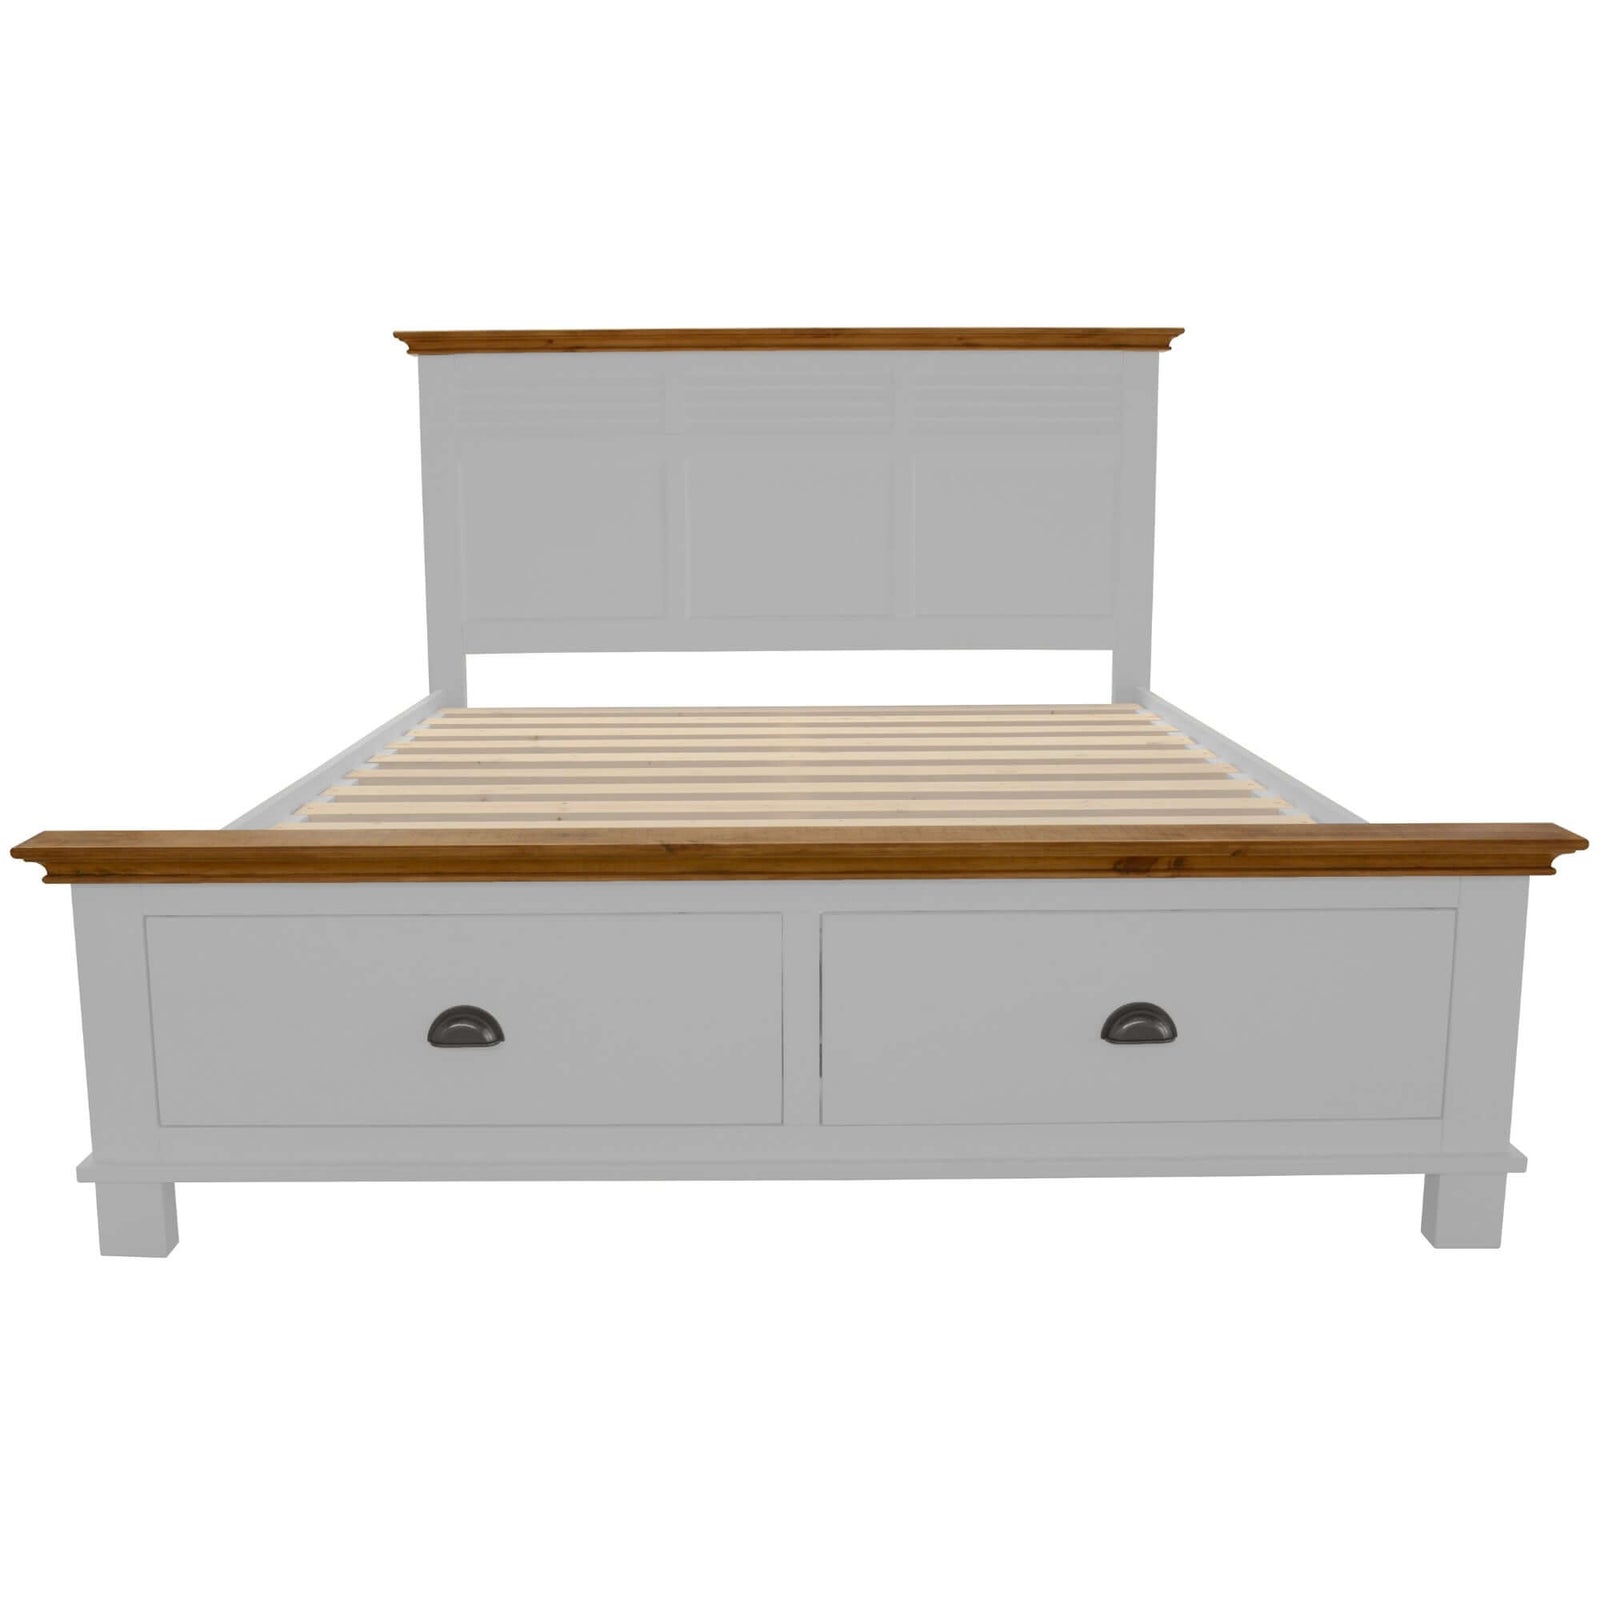 Virginia King Bed Frame with Storage - Solid Wood-Upinteriors